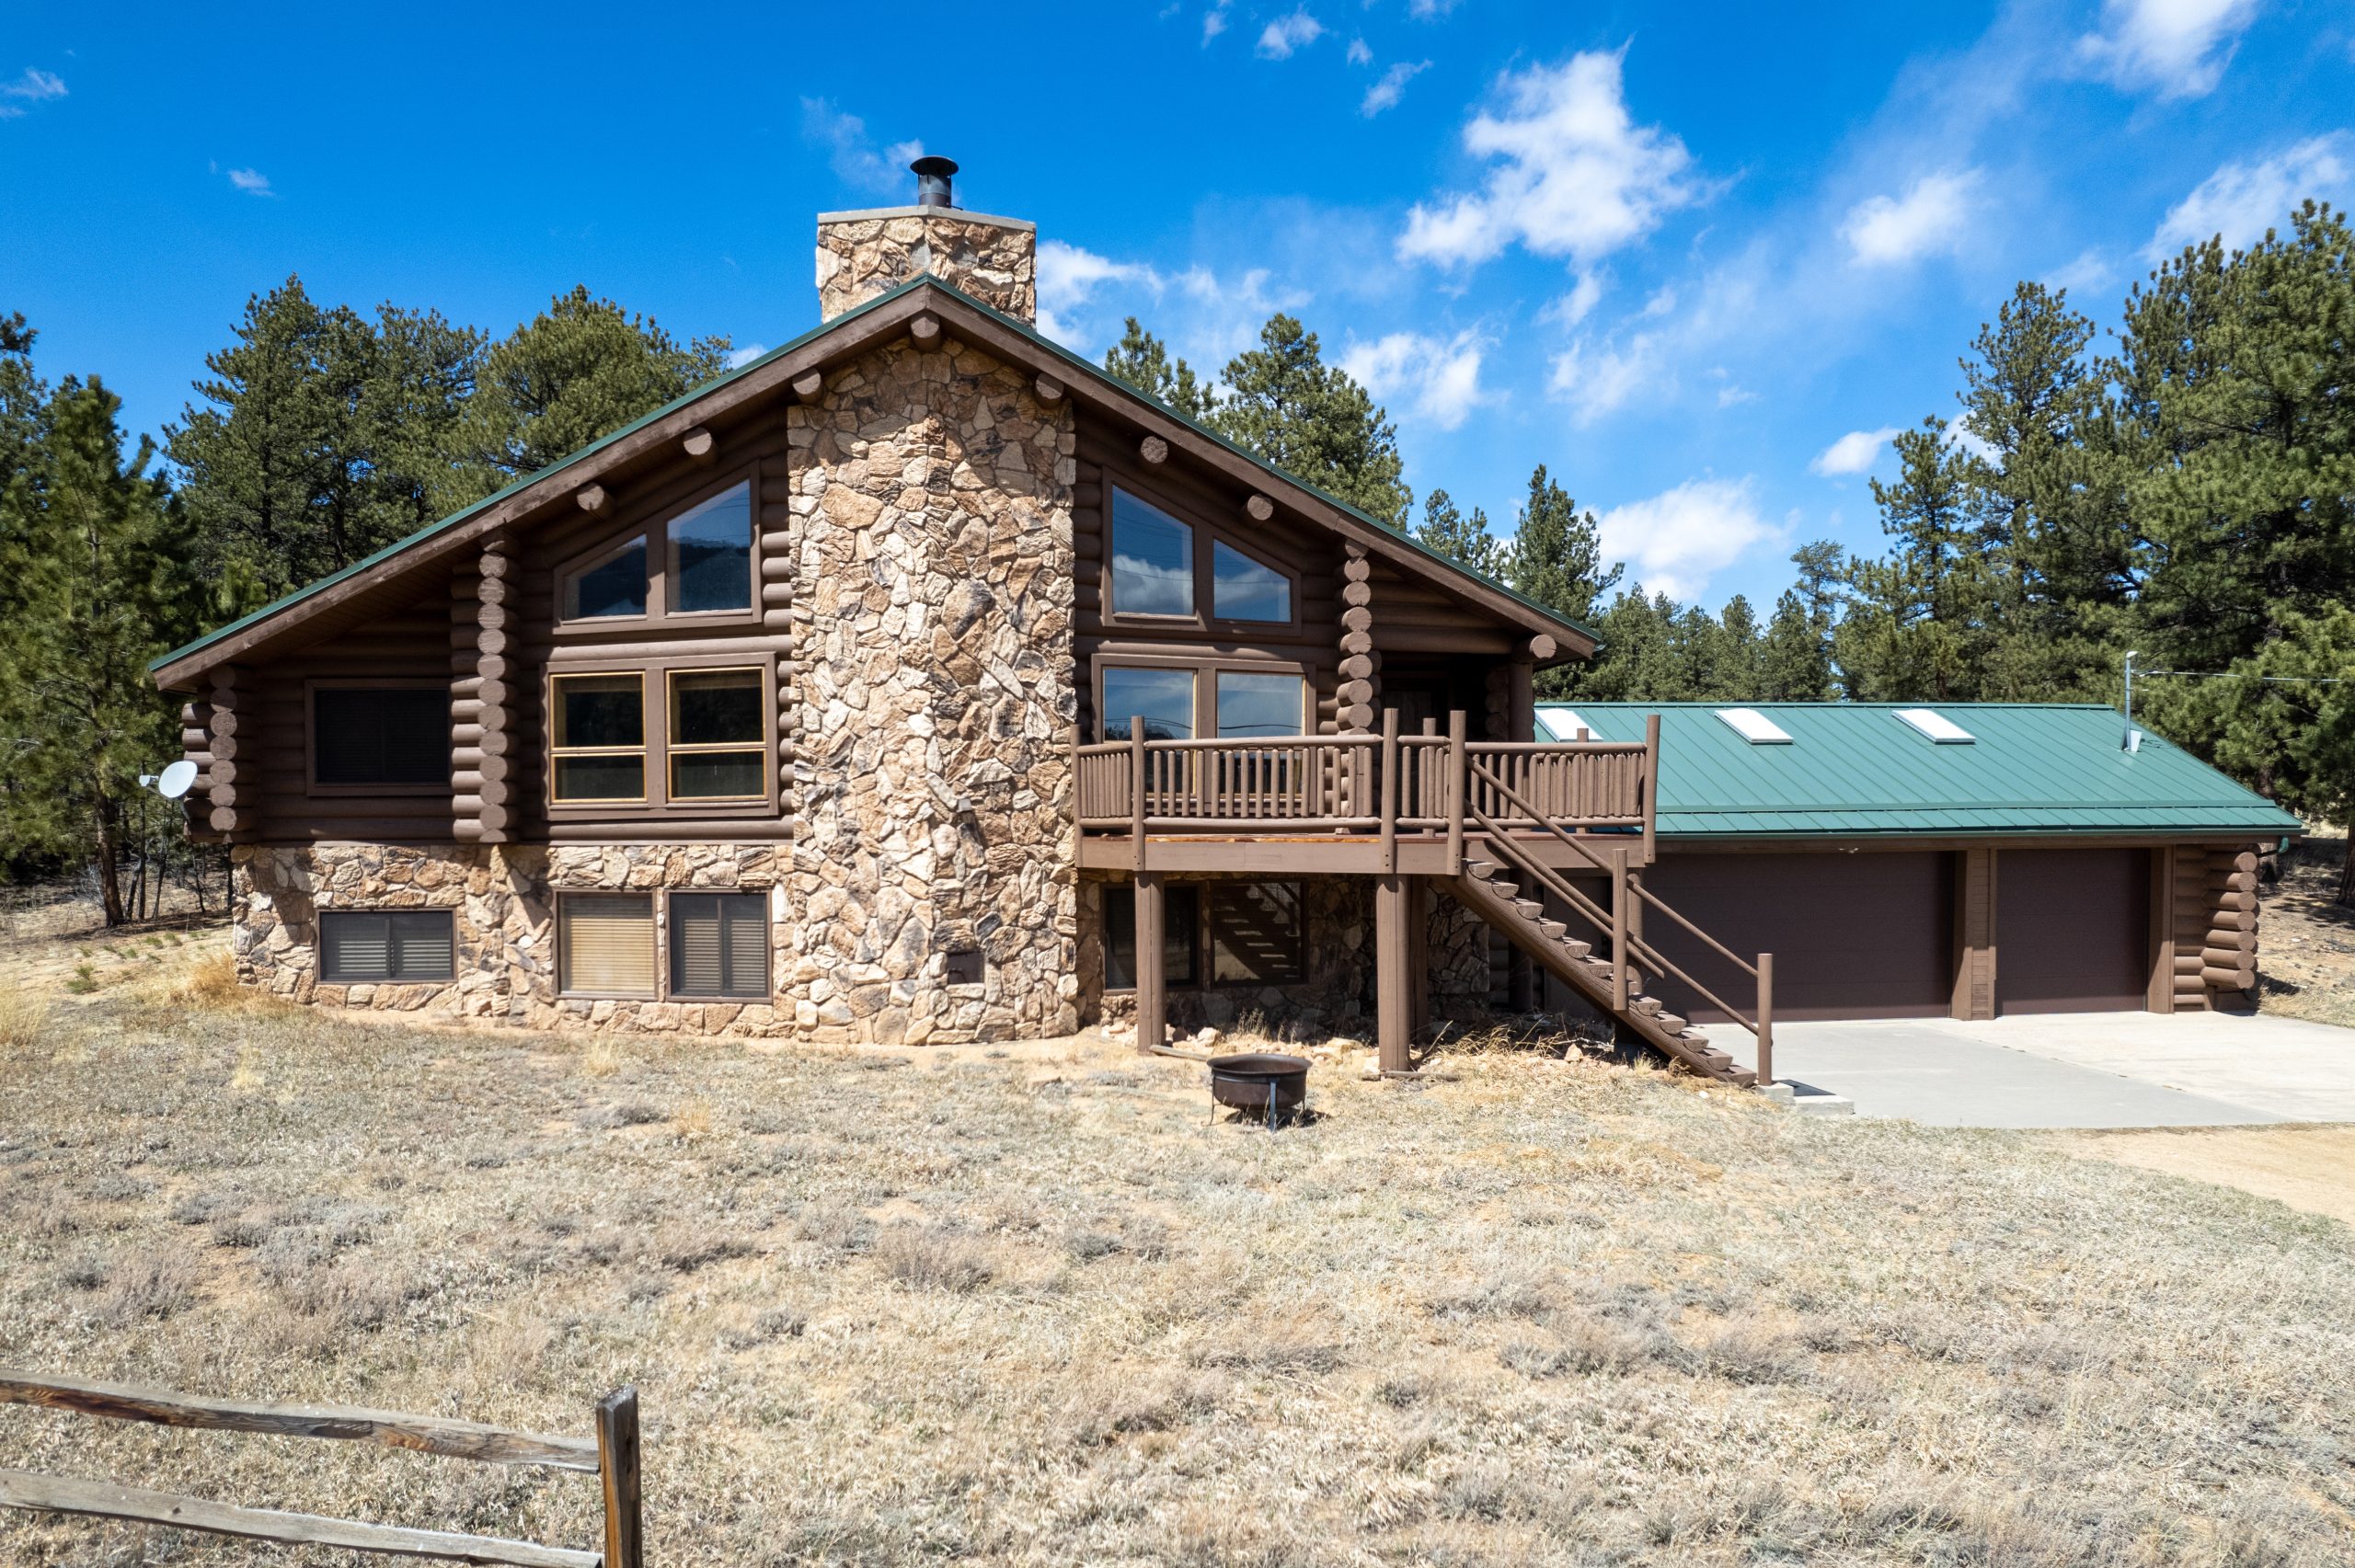 Our 3,500 SF Luxury Log Cabin Ranch Lodge offers magnificent modern amenities with a rustic feel. Features a 3-car garage, fire pit, game room with pool table, and bar area. Sleeps 8-12 guests. 